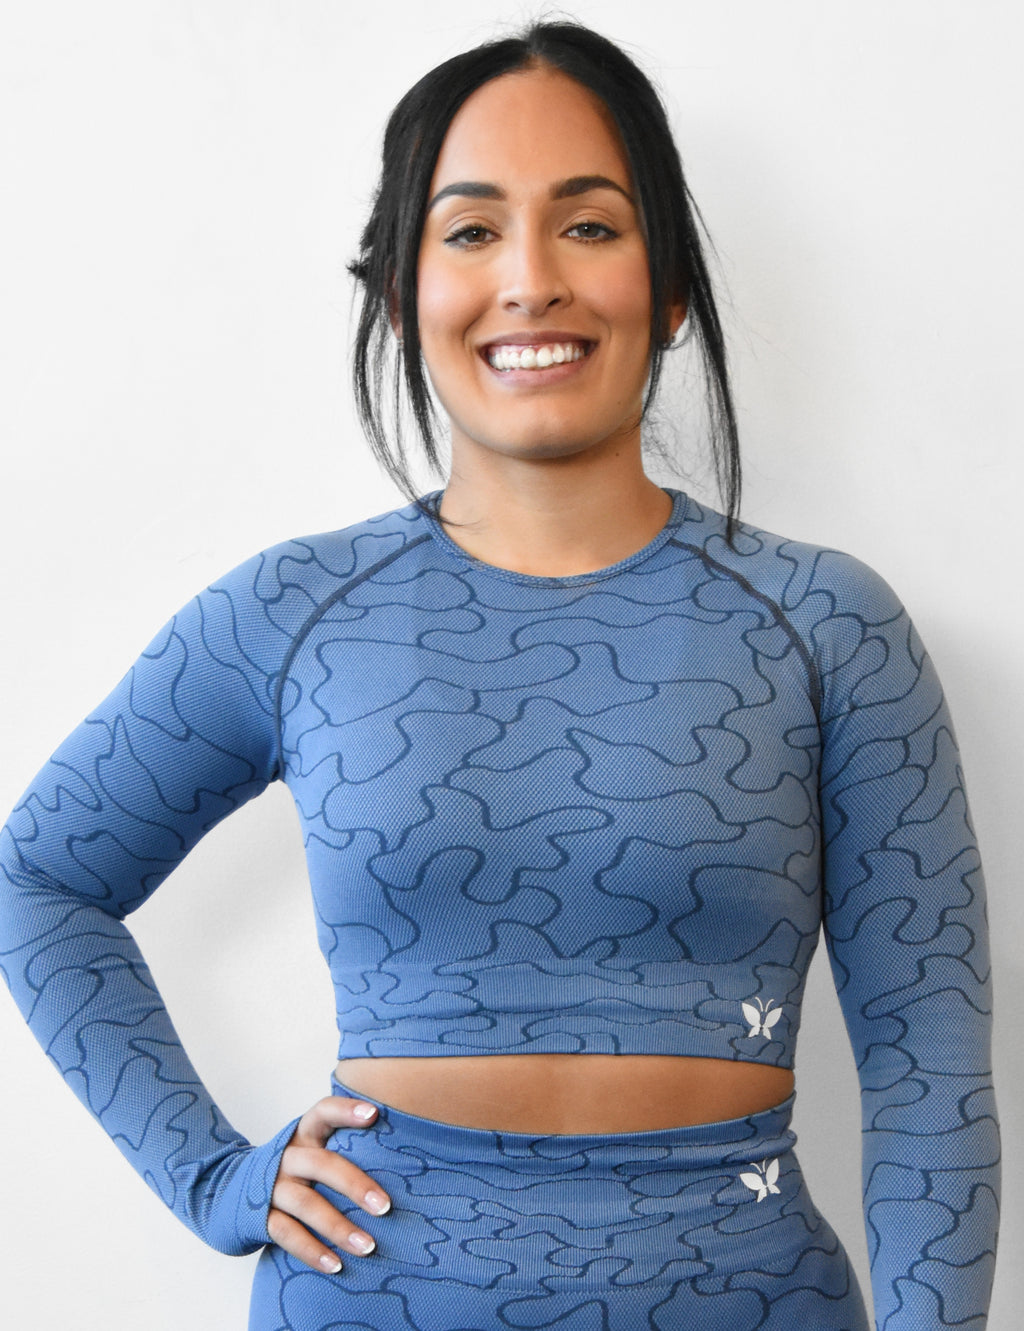 Blue Eagle Blossom Athletic Crop Top